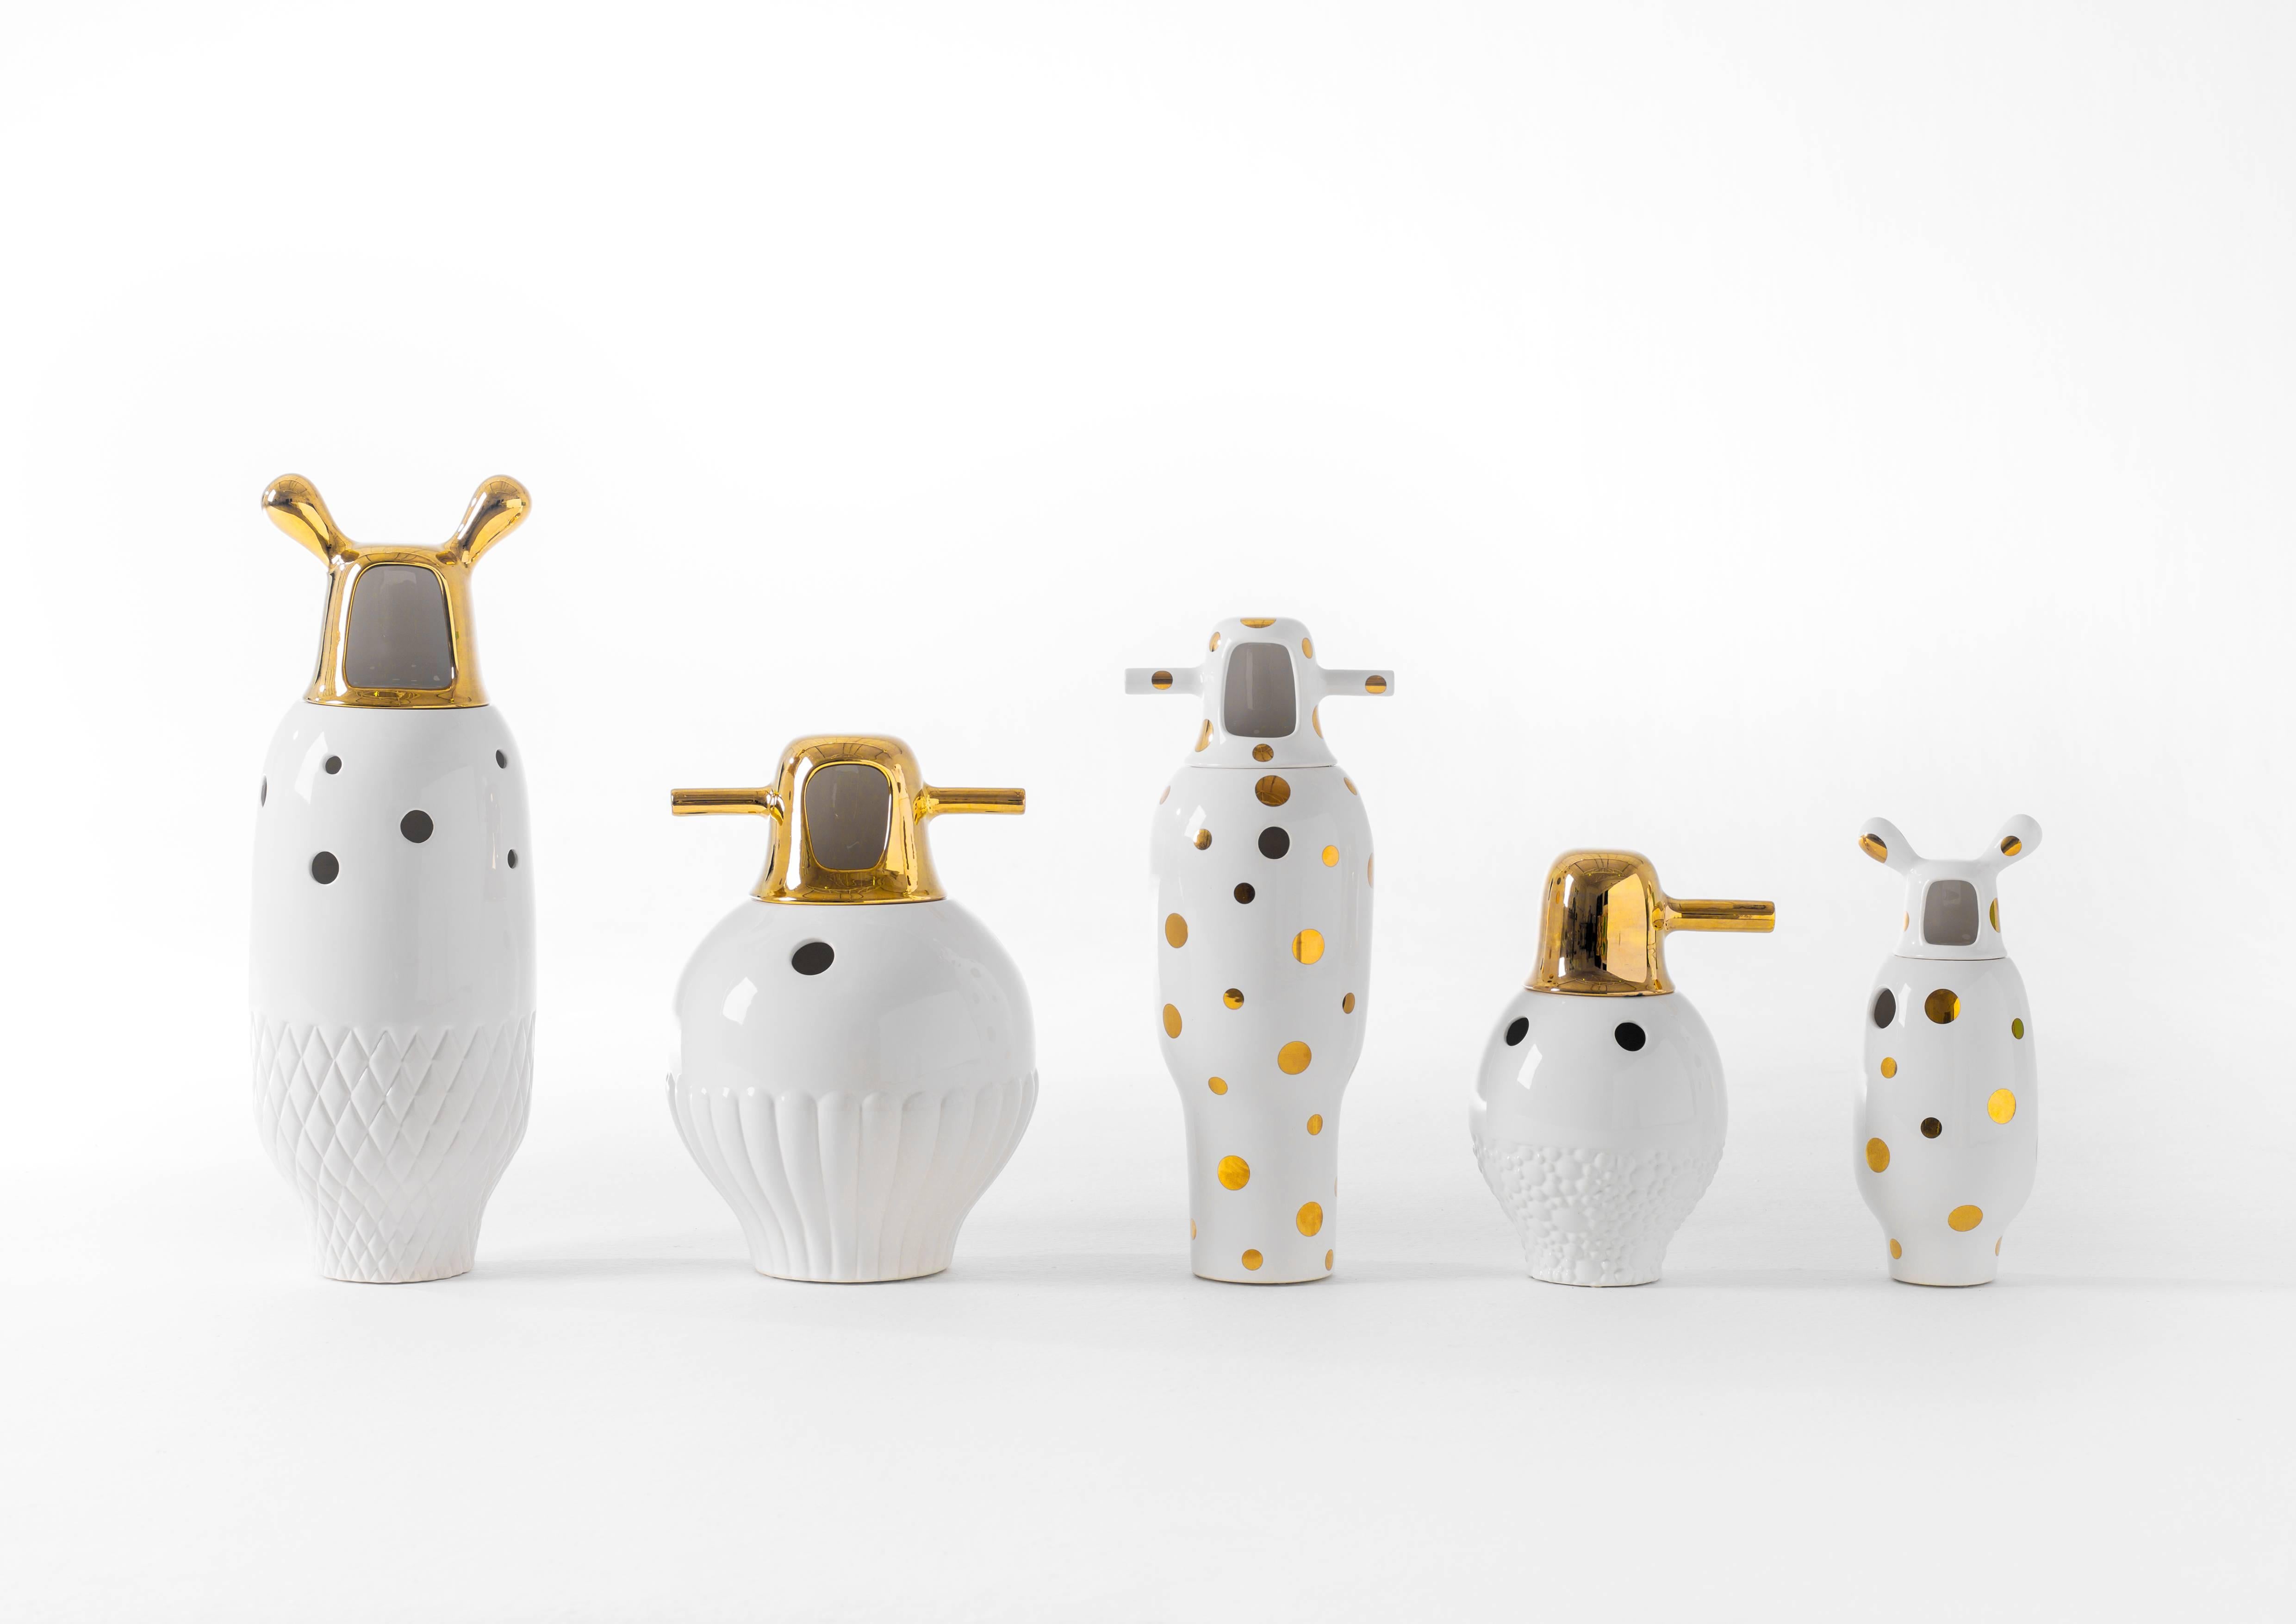 The Showtime vases by Jaime Hayon are the most iconic in BD’s catalogue. For the 10th anniversary of the Hayon's Showtime collection BD asked the designer to come up with a new speical finish. 

The anniversary vases have a new white enamel finish